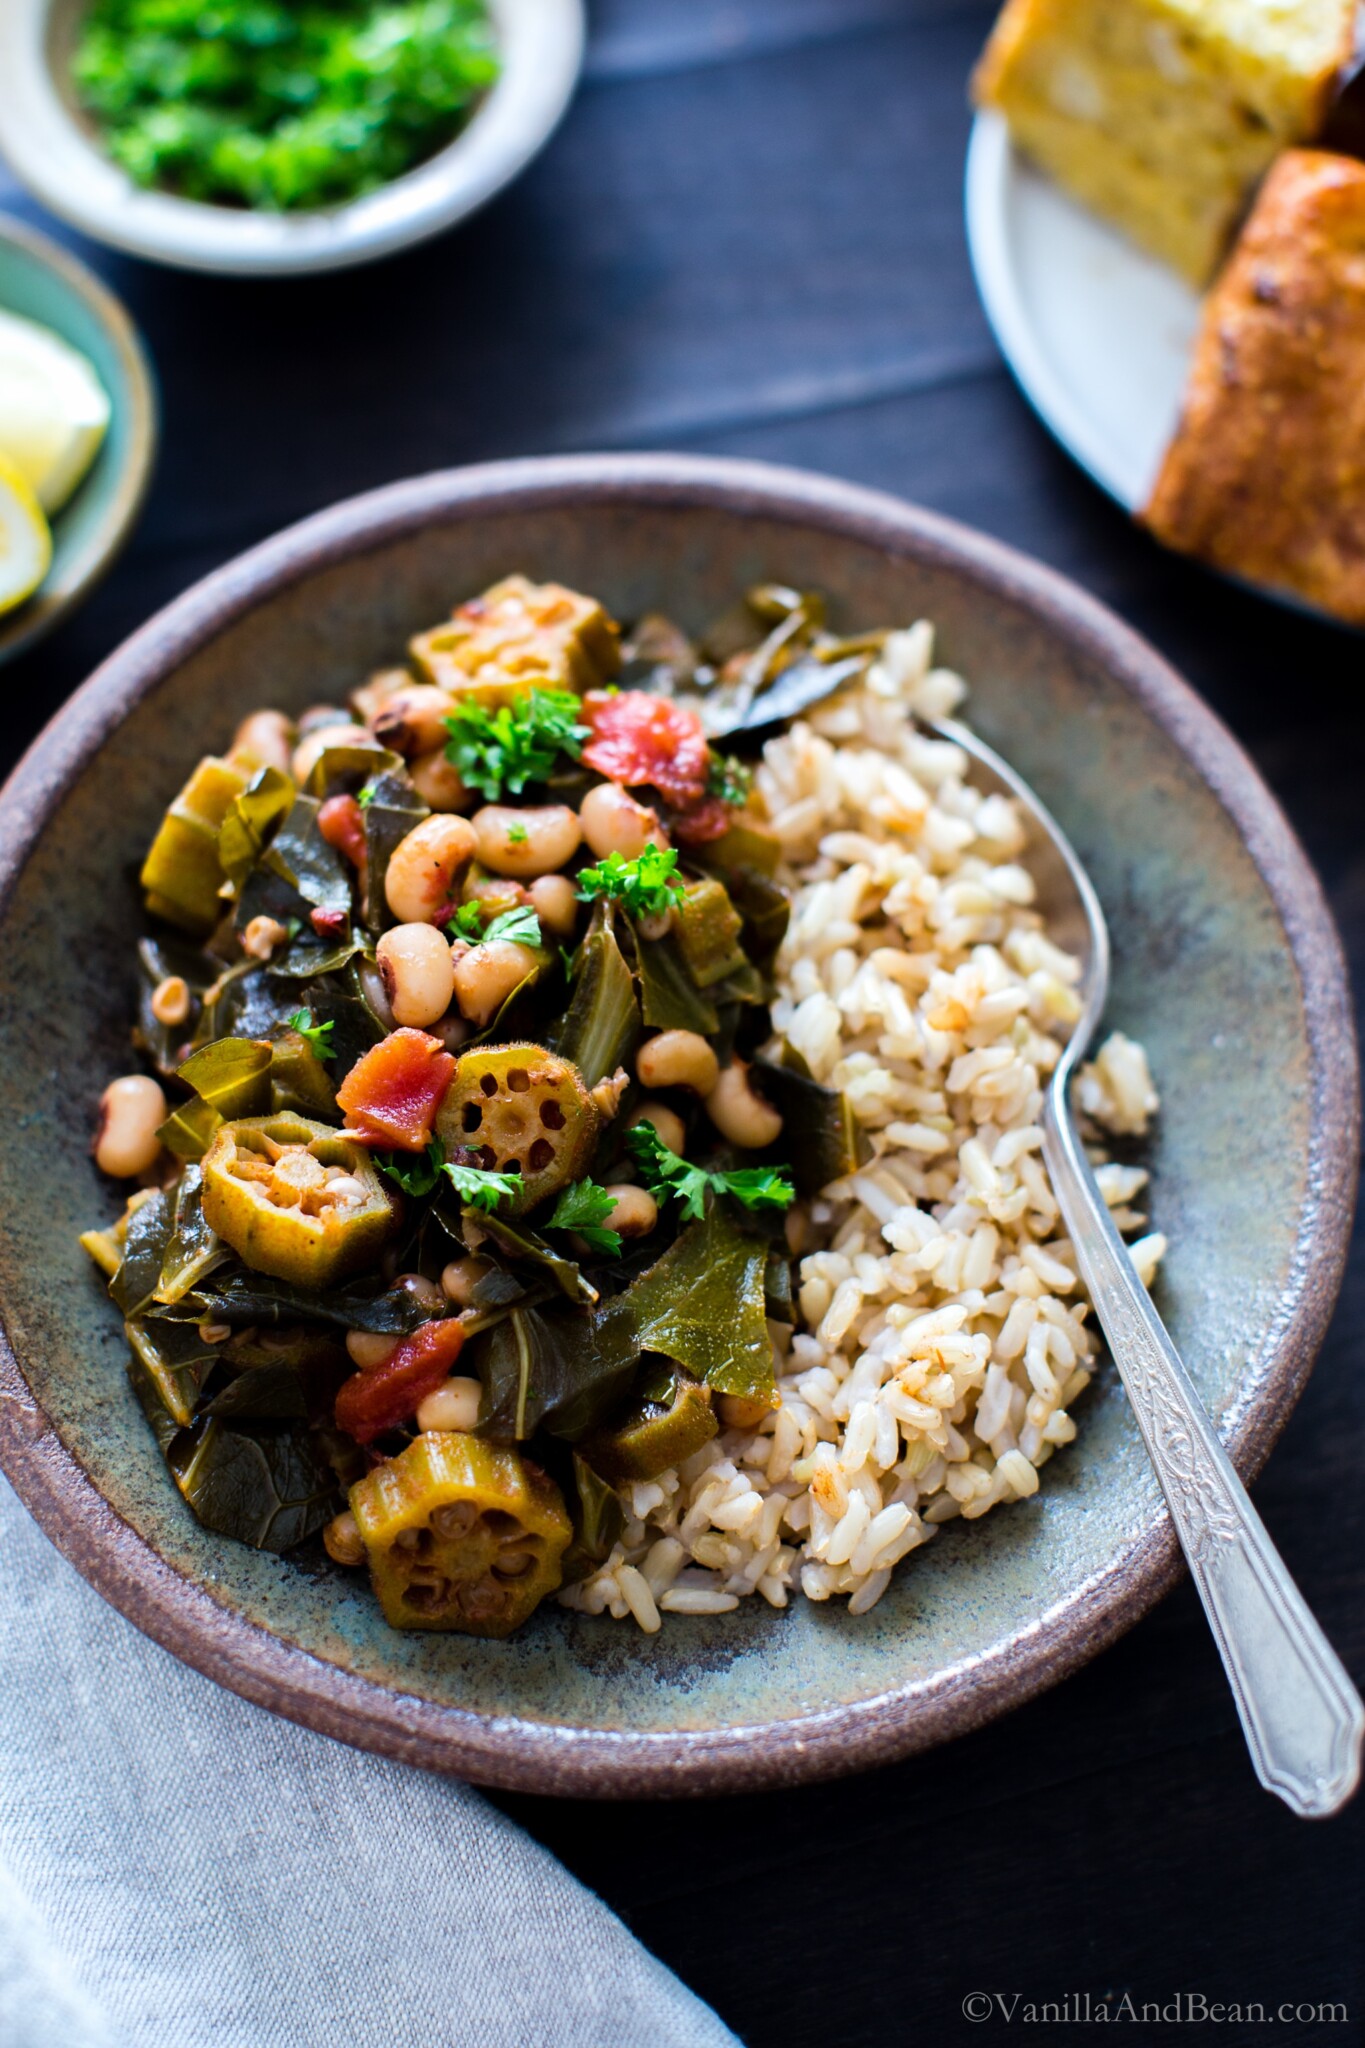 Harissa Stewed Black-Eyed Peas with Okra and Collard Greens in a bowl with brown rice ready for sharing.